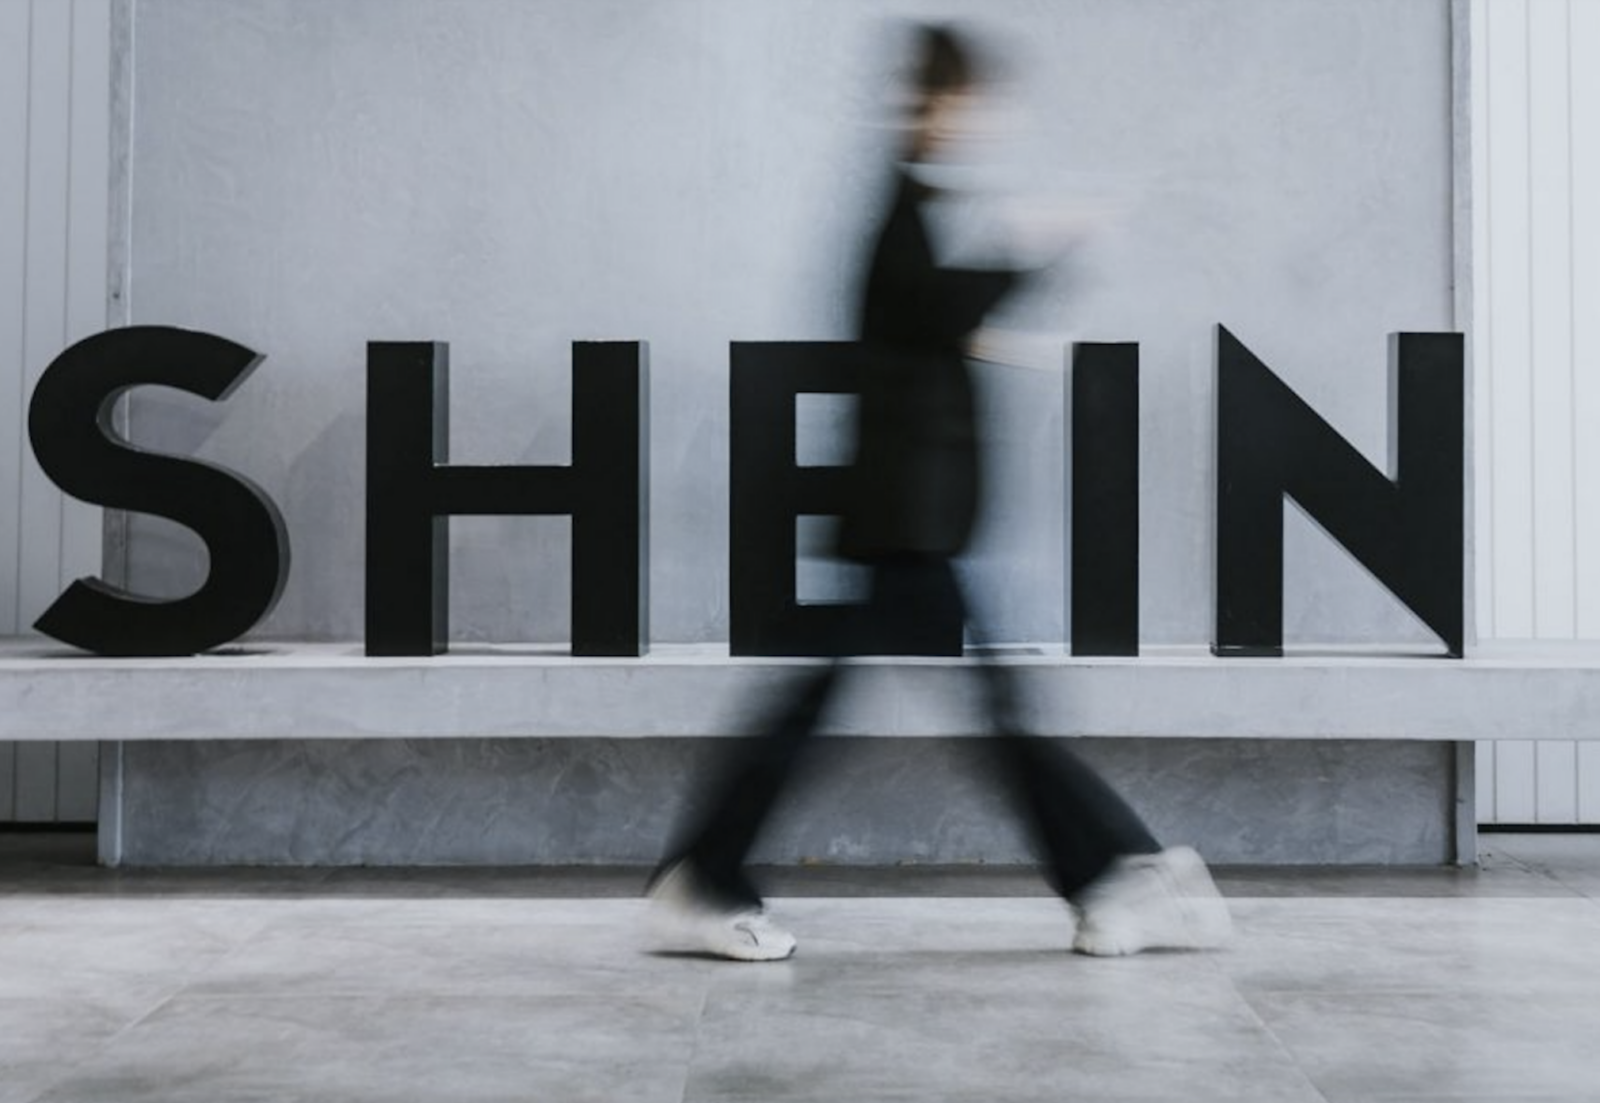 EU Regulator Ramps Up Online Content Rules for Shein. Now What?